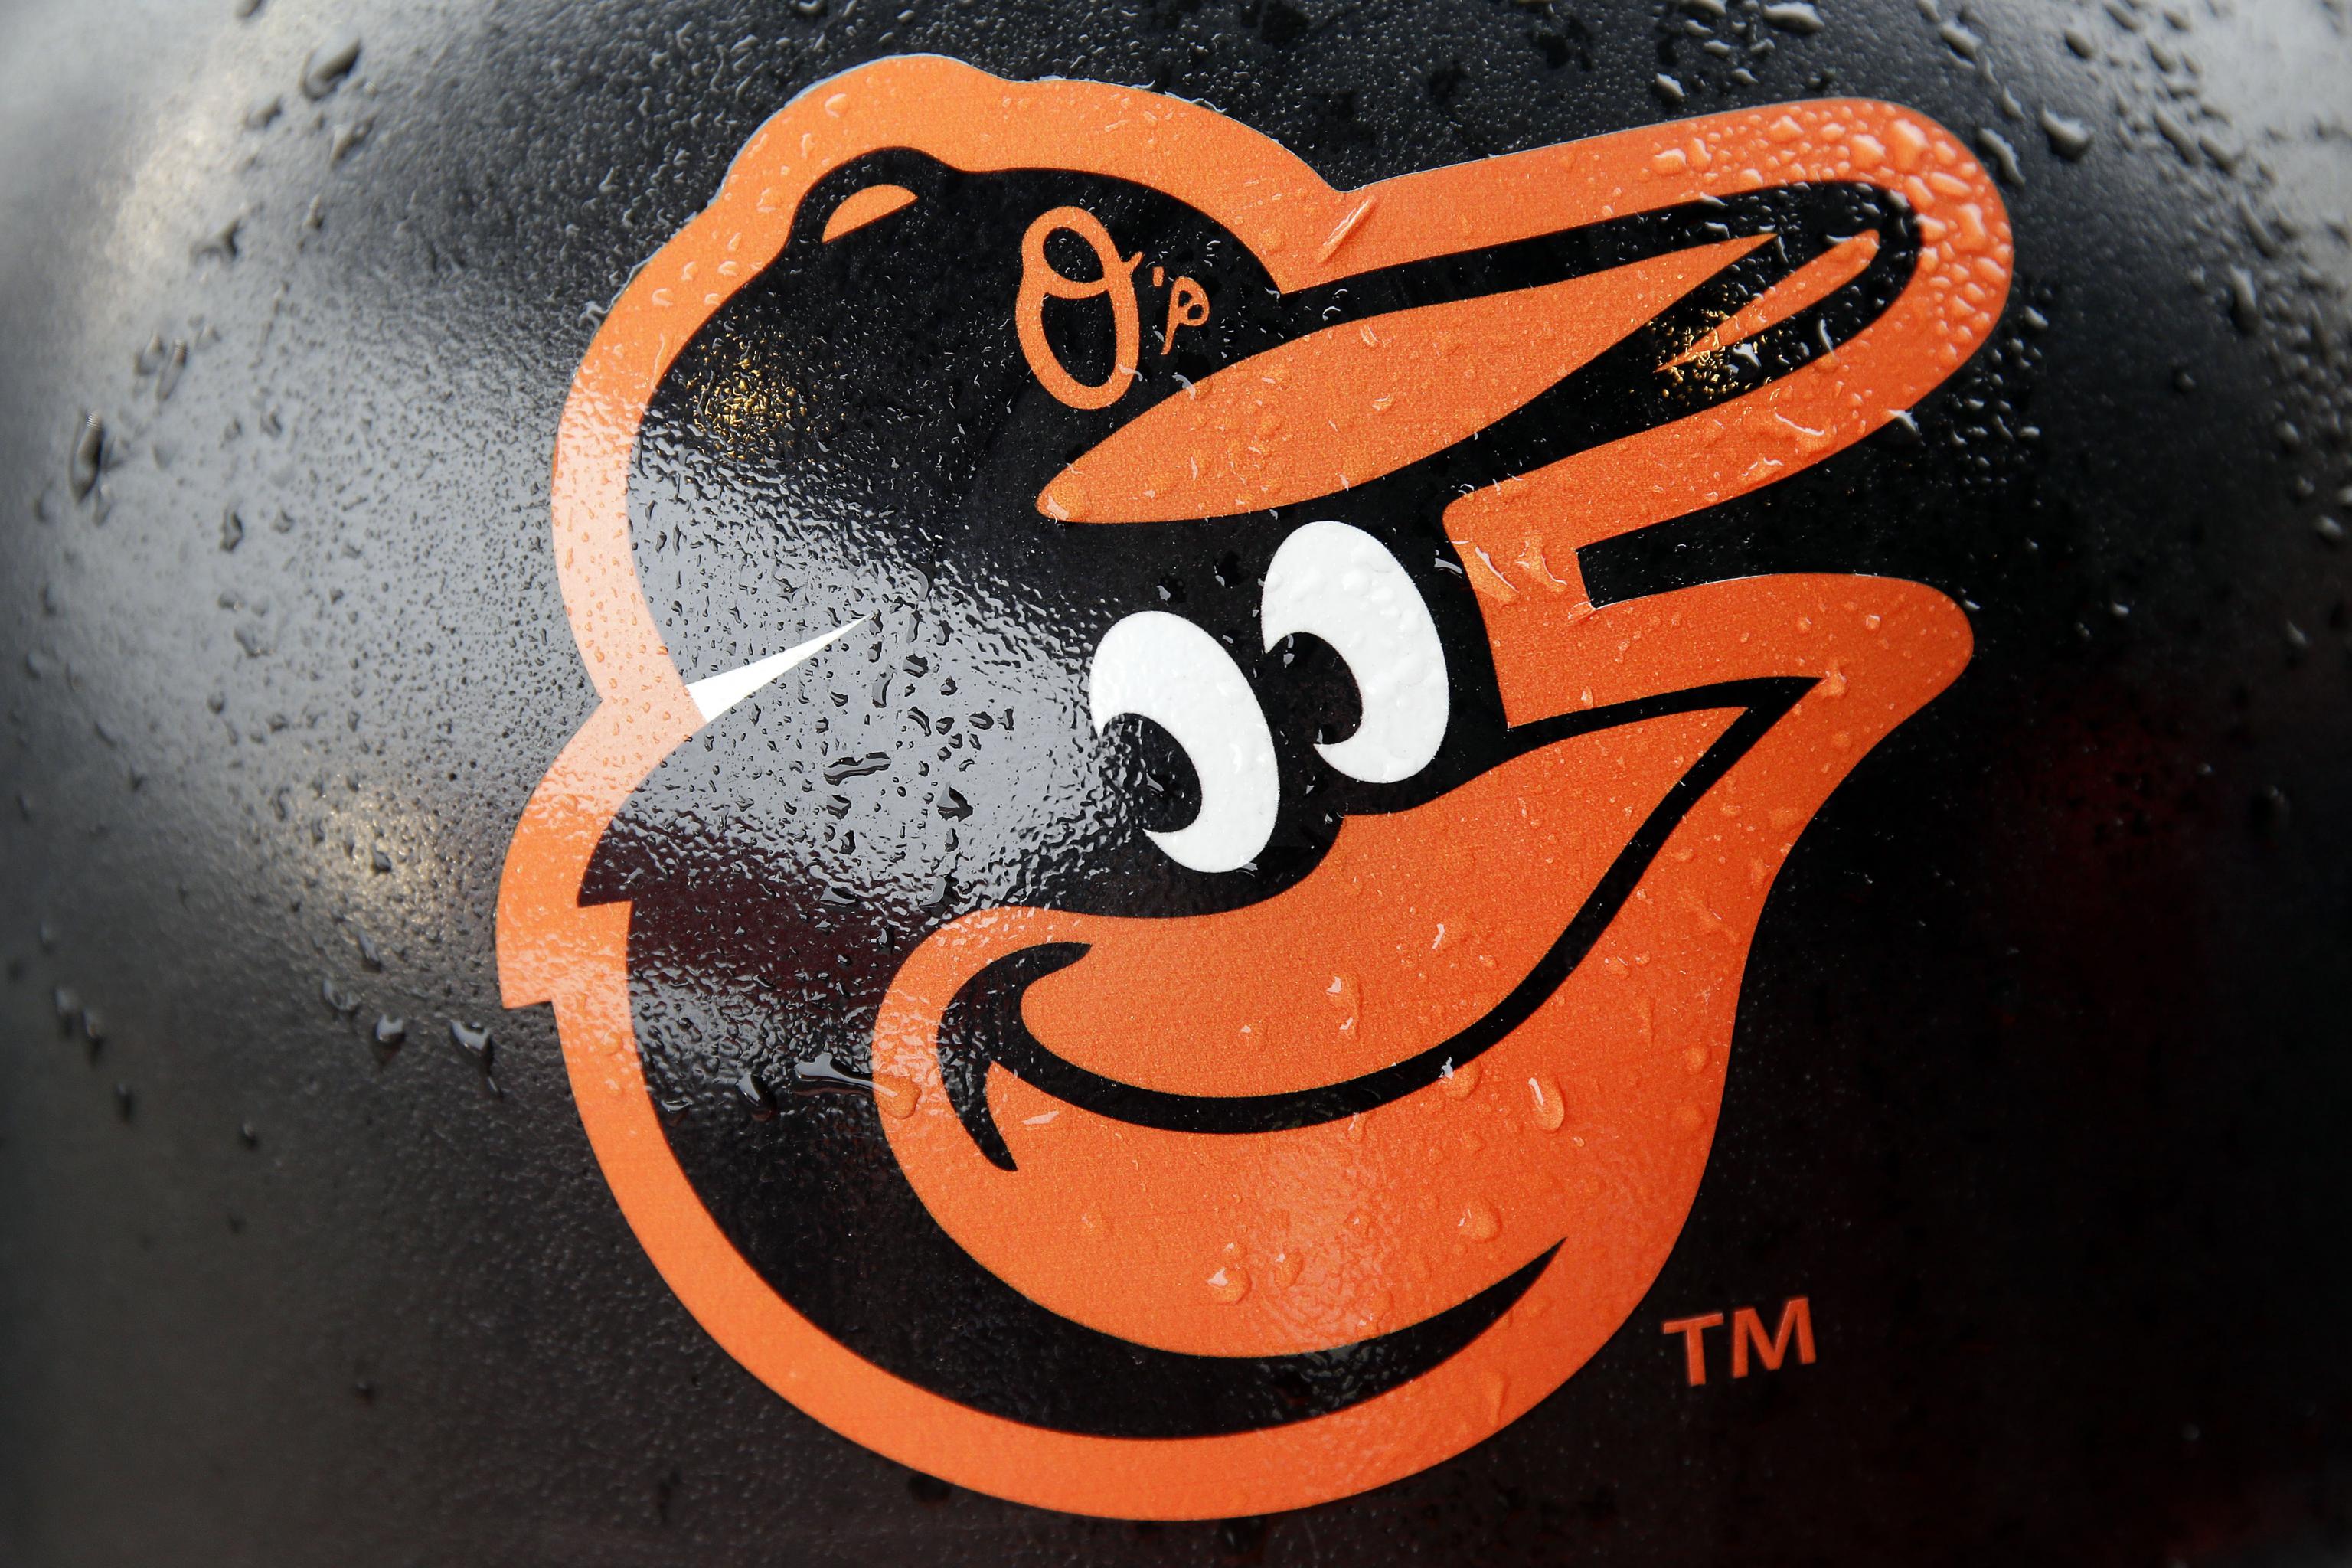 Orioles Braille Uniforms Up for Auction to Benefit National